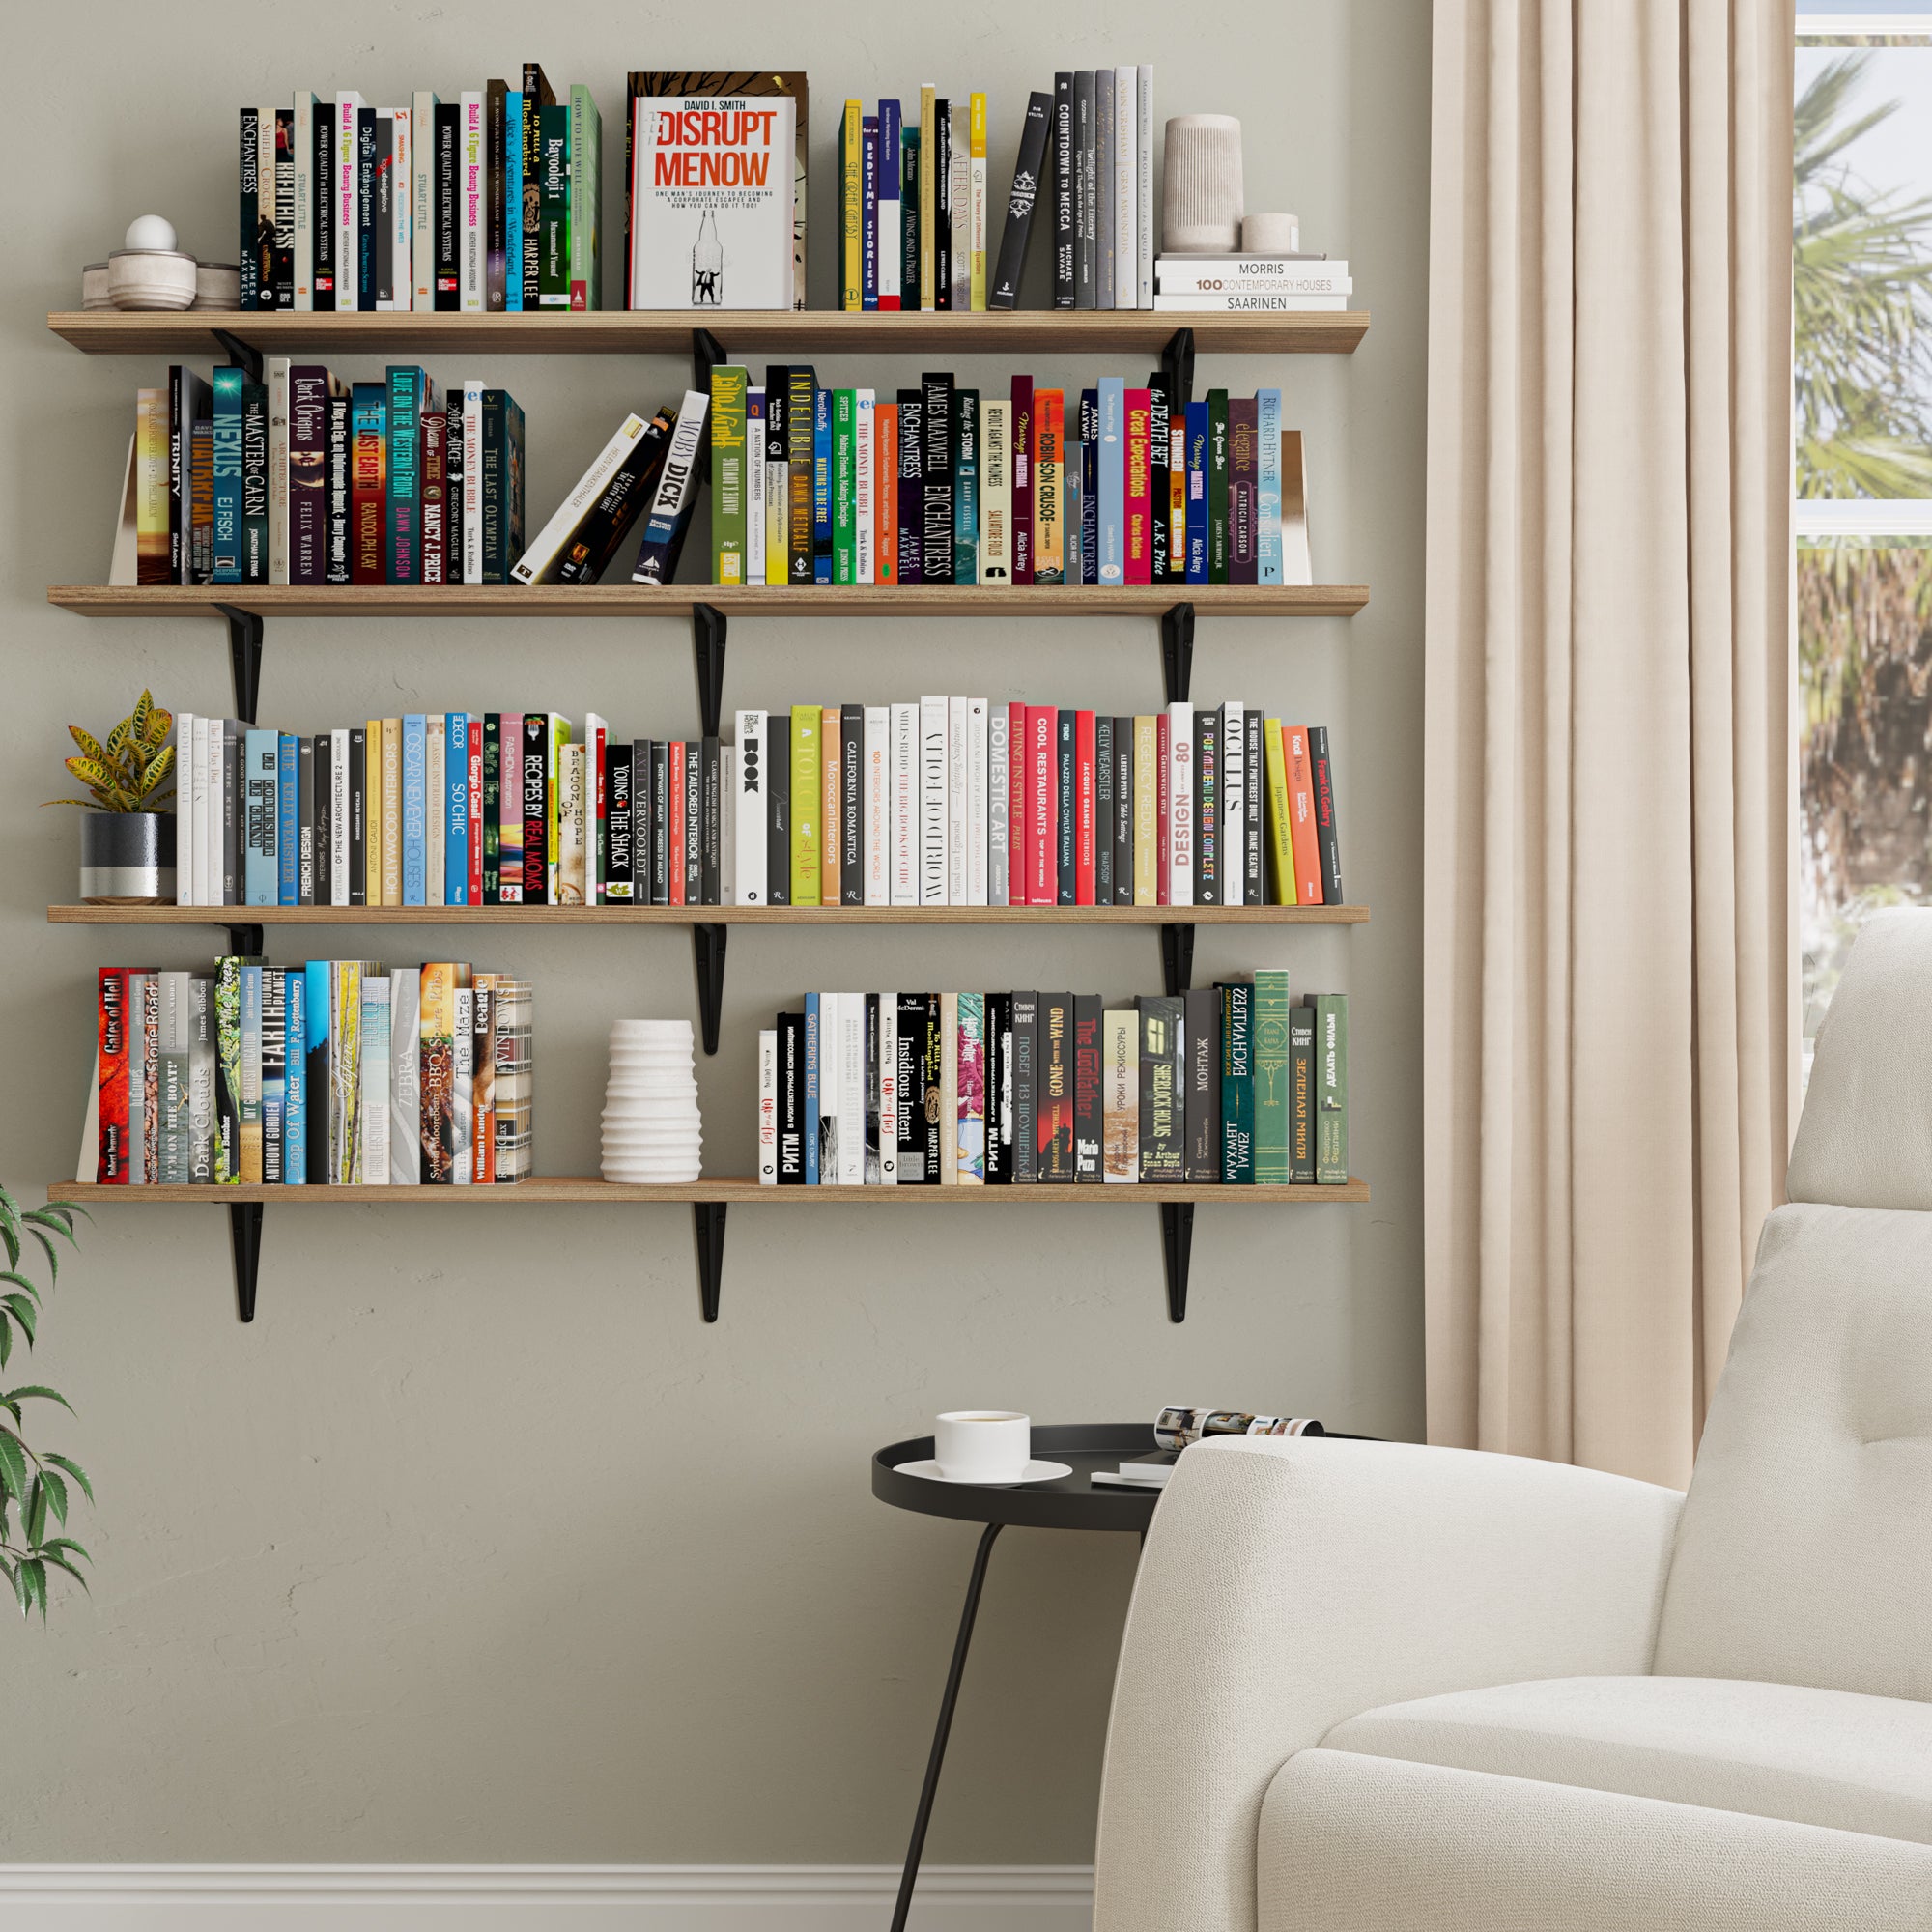 A cozy reading nook featuring four burnt shelves for wall shelves, heavily stacked with a diverse collection of books, framed by a large window with curtains, and a comfy chair in the foreground.